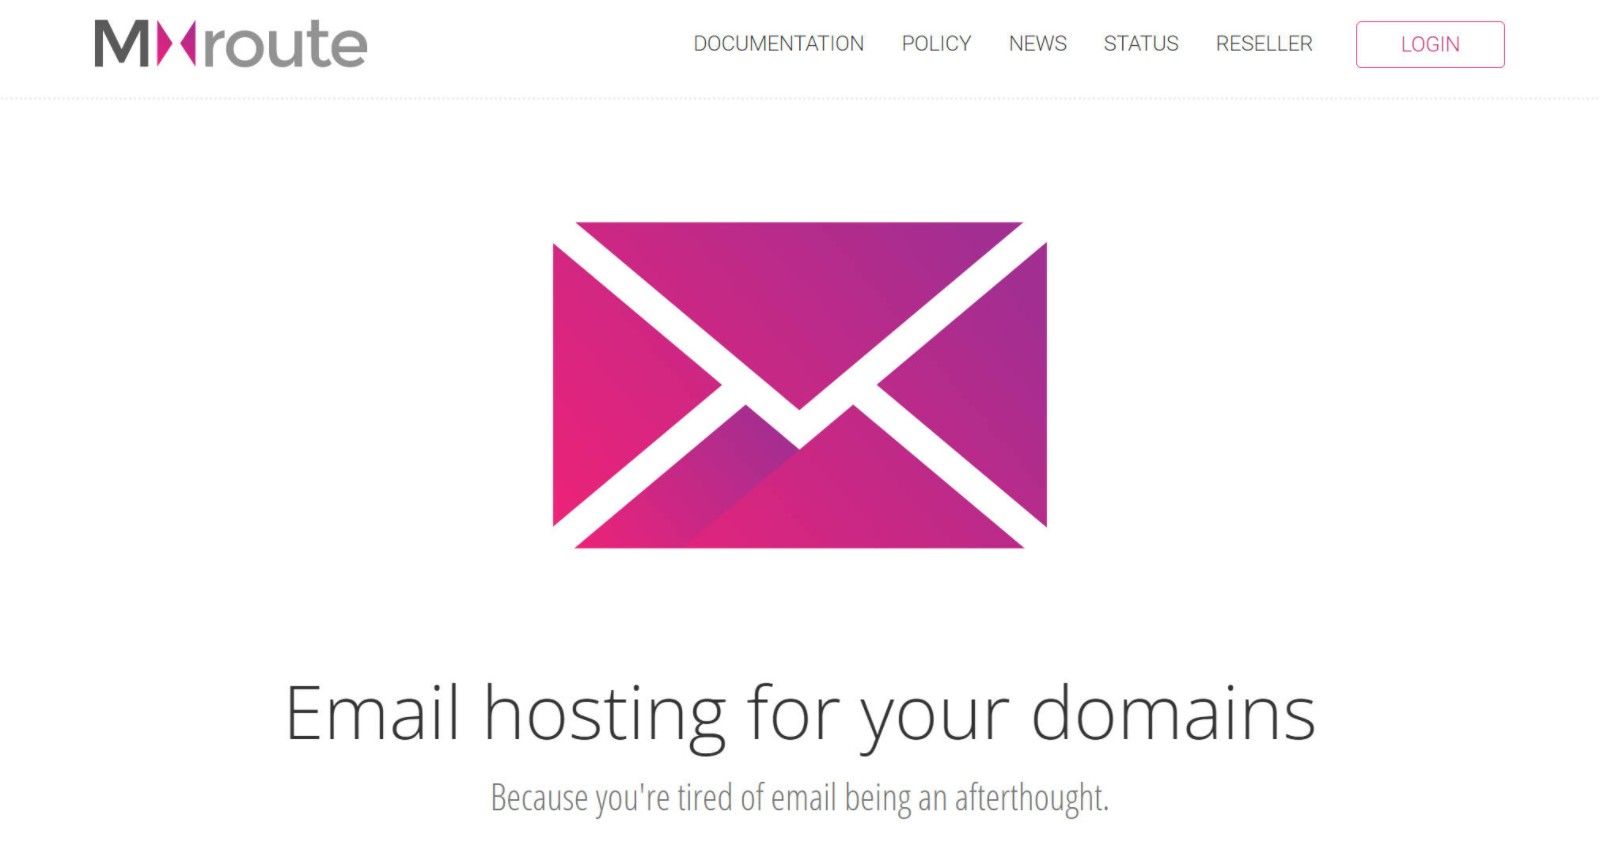 MXroute email hosting.